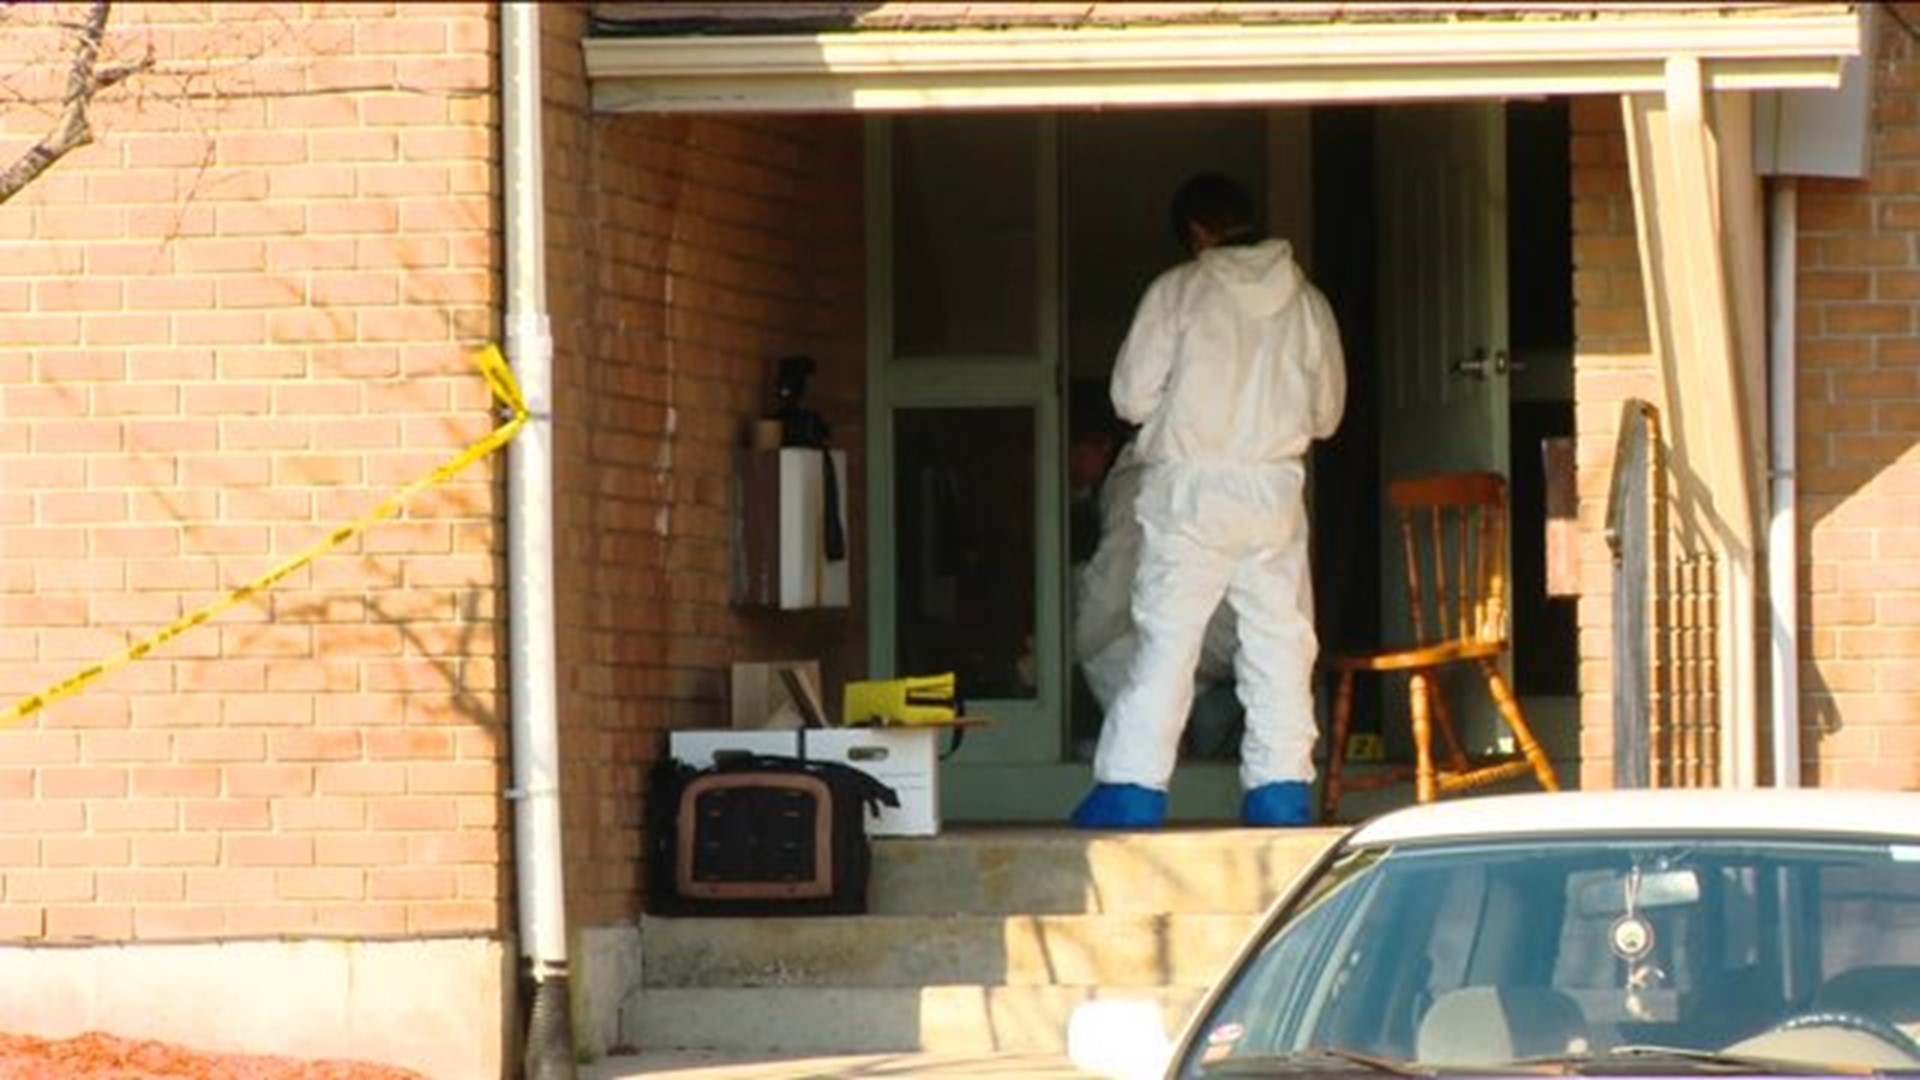 2011 - Norwich mother killed